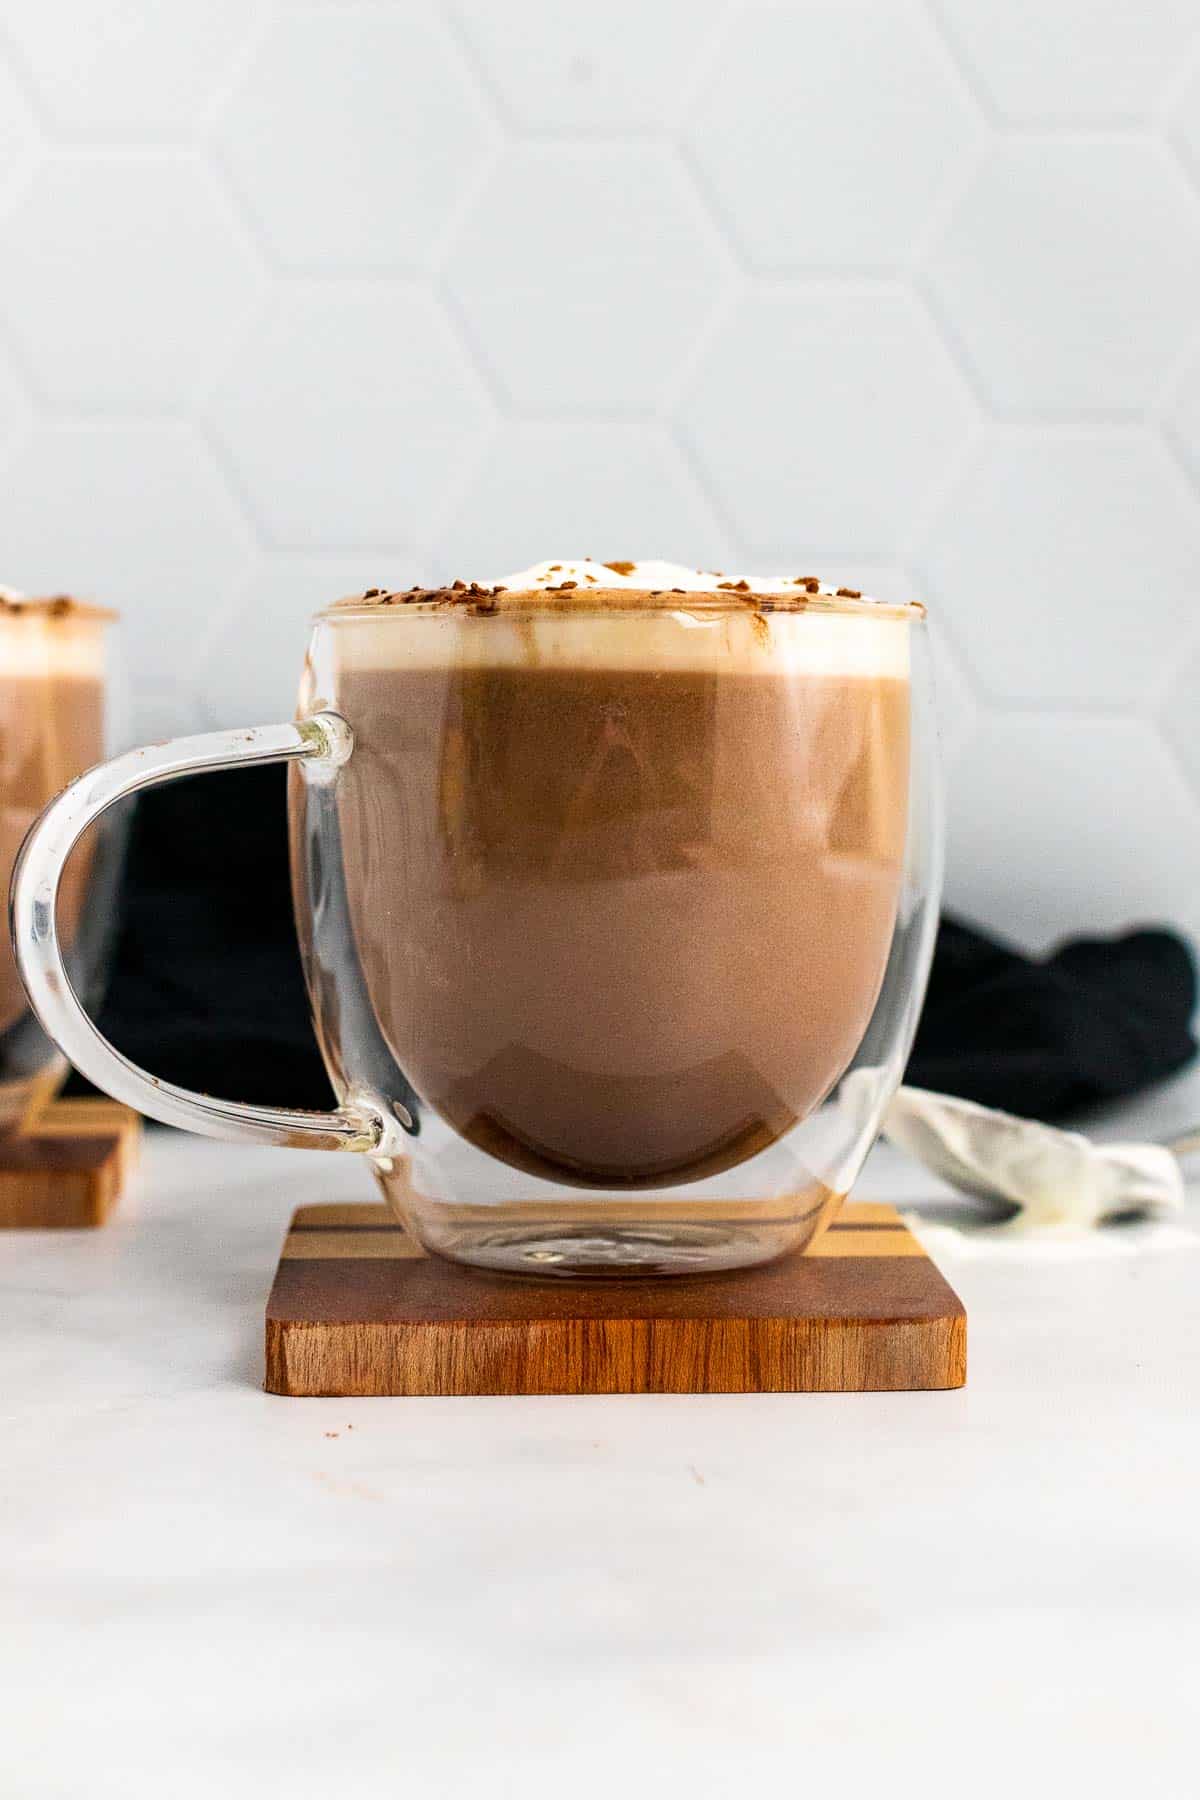 Keto hot chocolate in a clear plastic mug, topped with whipped cream and cocoa powder